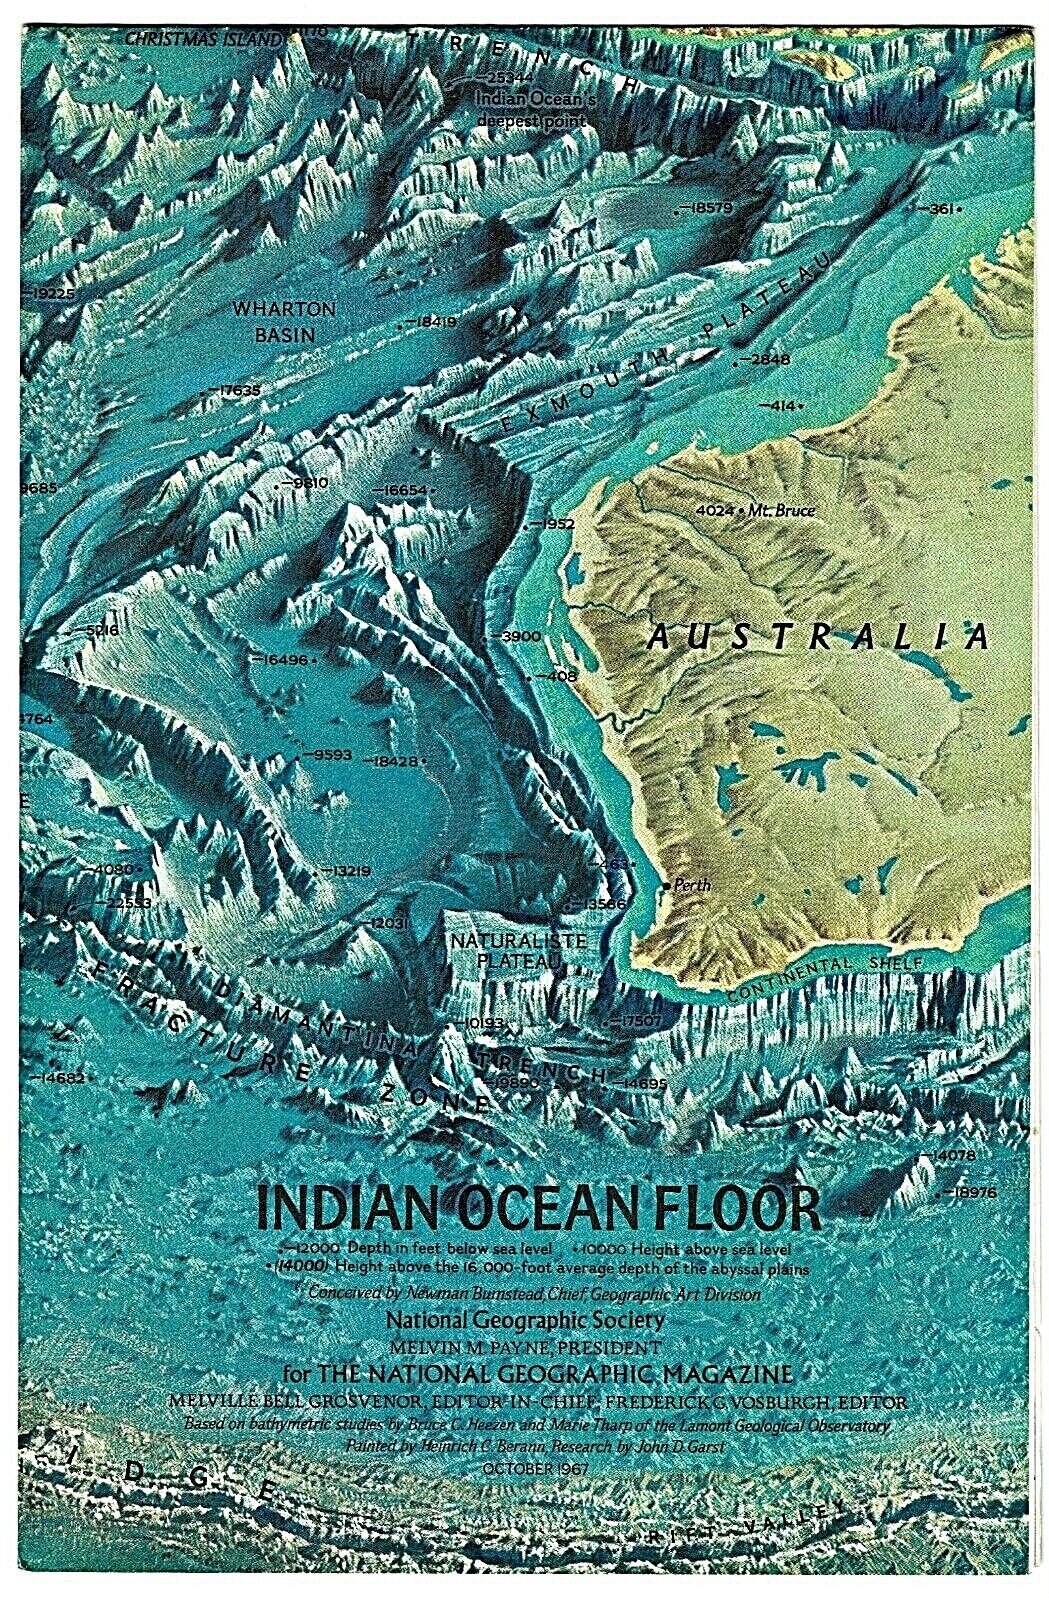 1967 October Indian Ocean Floor National Geographic Map Poster - B (a)